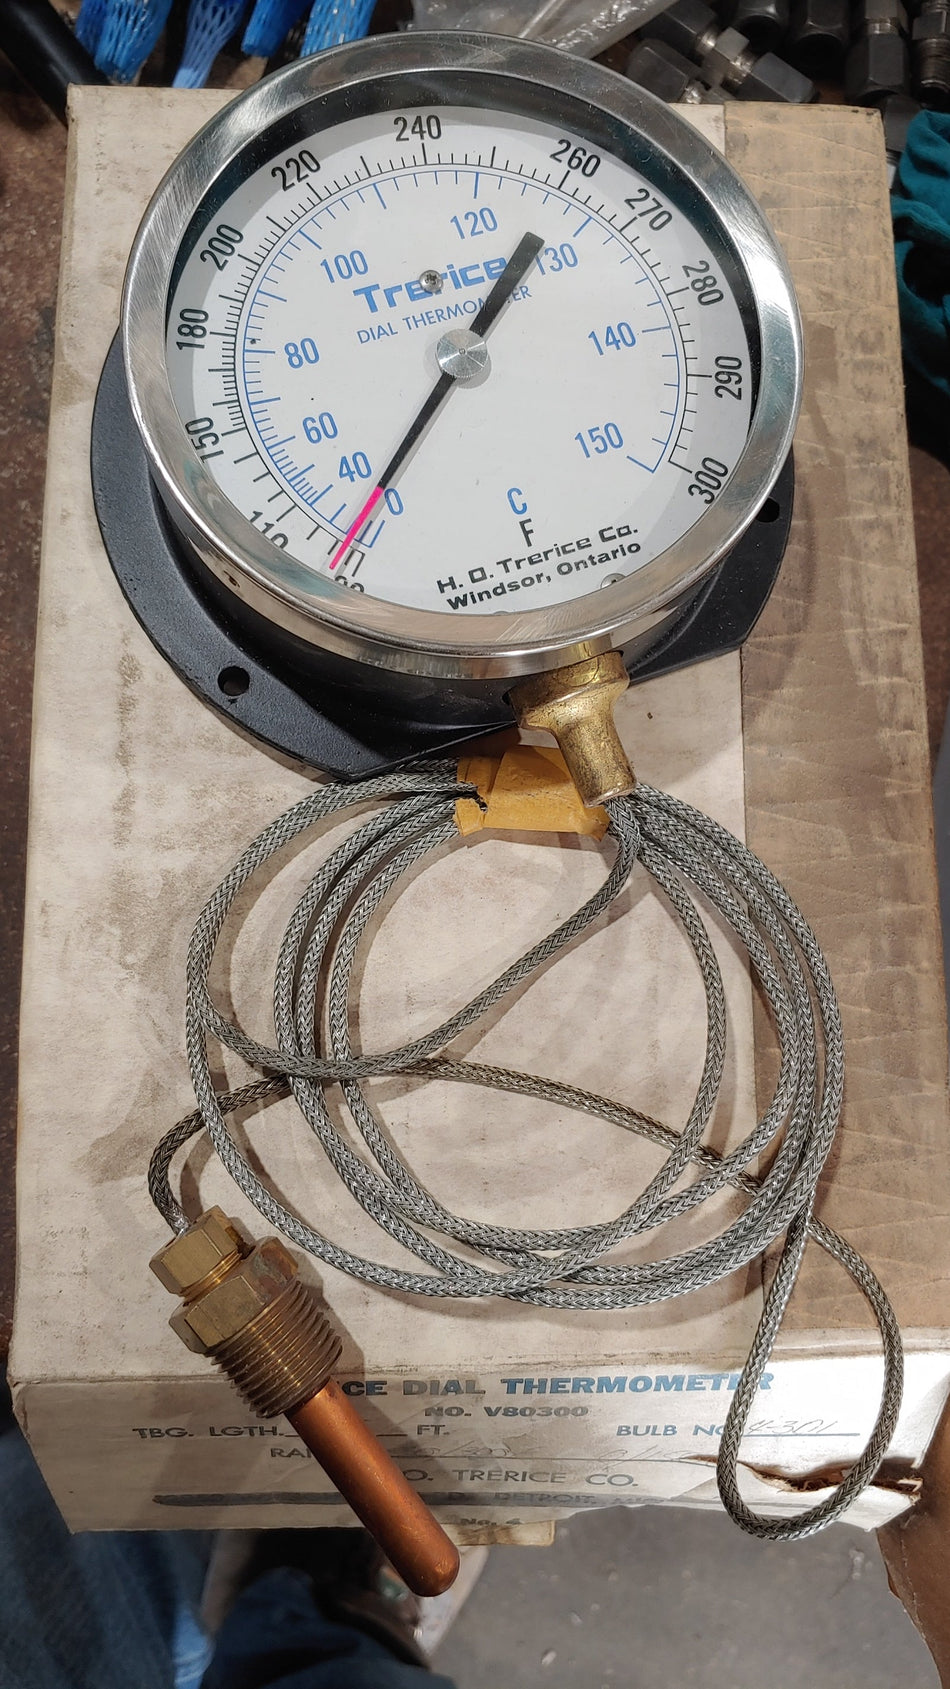 TRERICE V80300 DIAL THERMOMETER  4-7/8" DIAL  30-300F  0-150C  BULB NO. 4-3D1